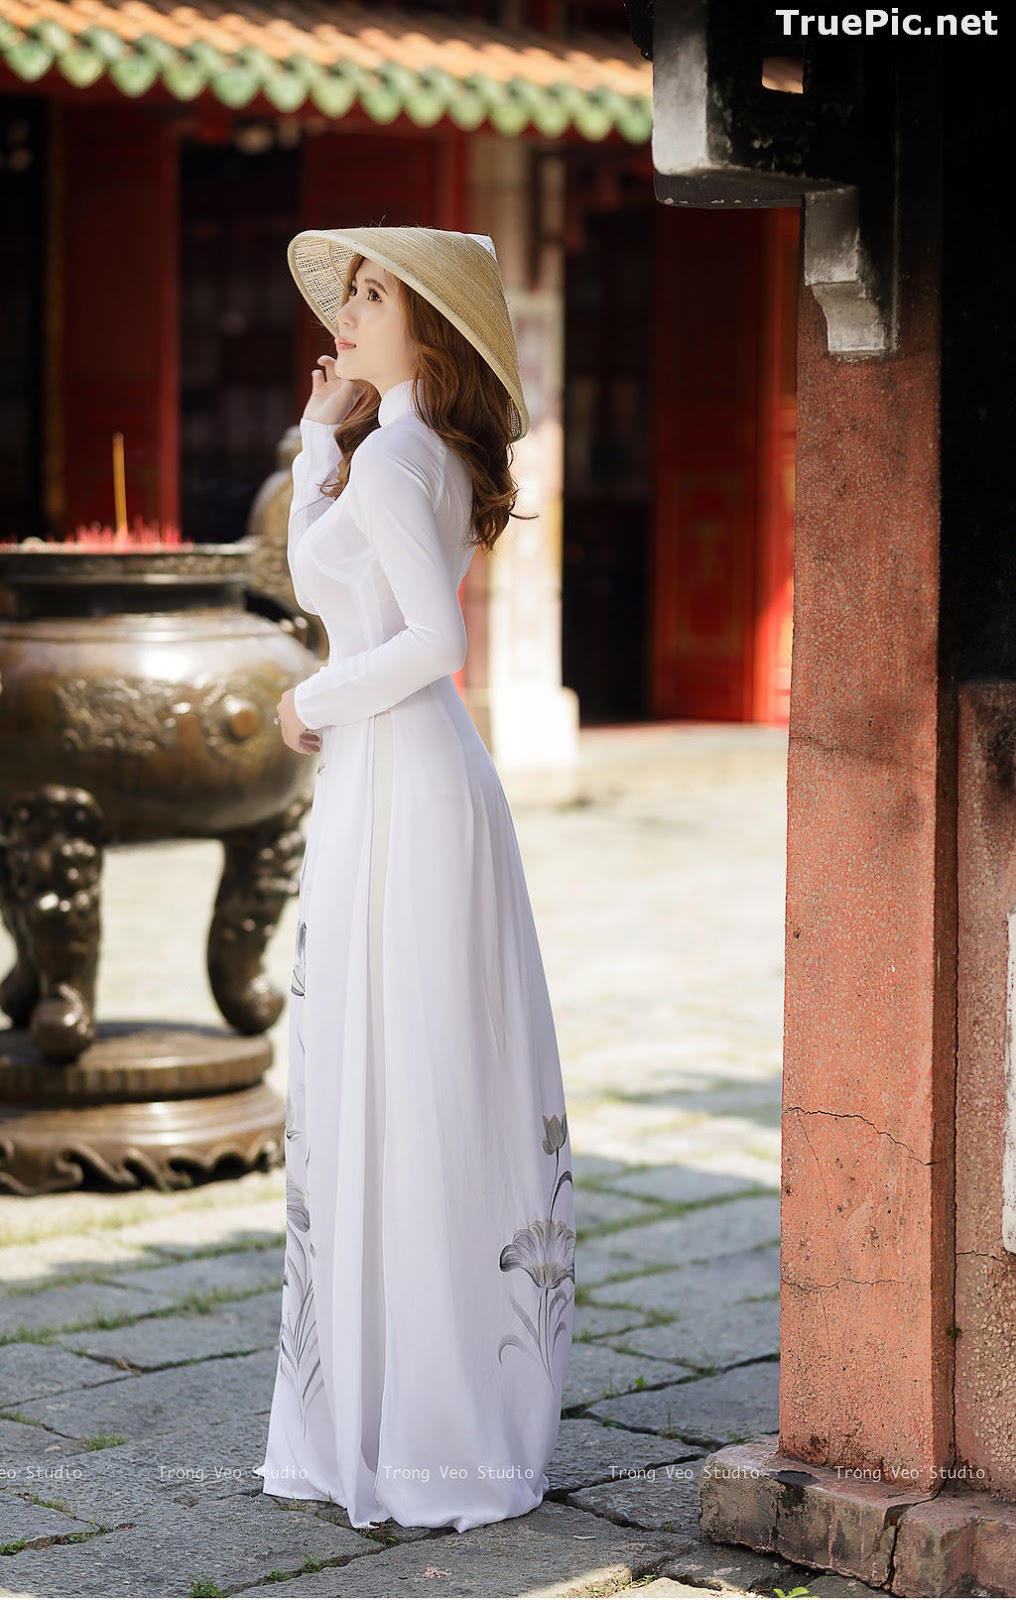 Image The Beauty of Vietnamese Girls with Traditional Dress (Ao Dai) #4 - TruePic.net - Picture-34